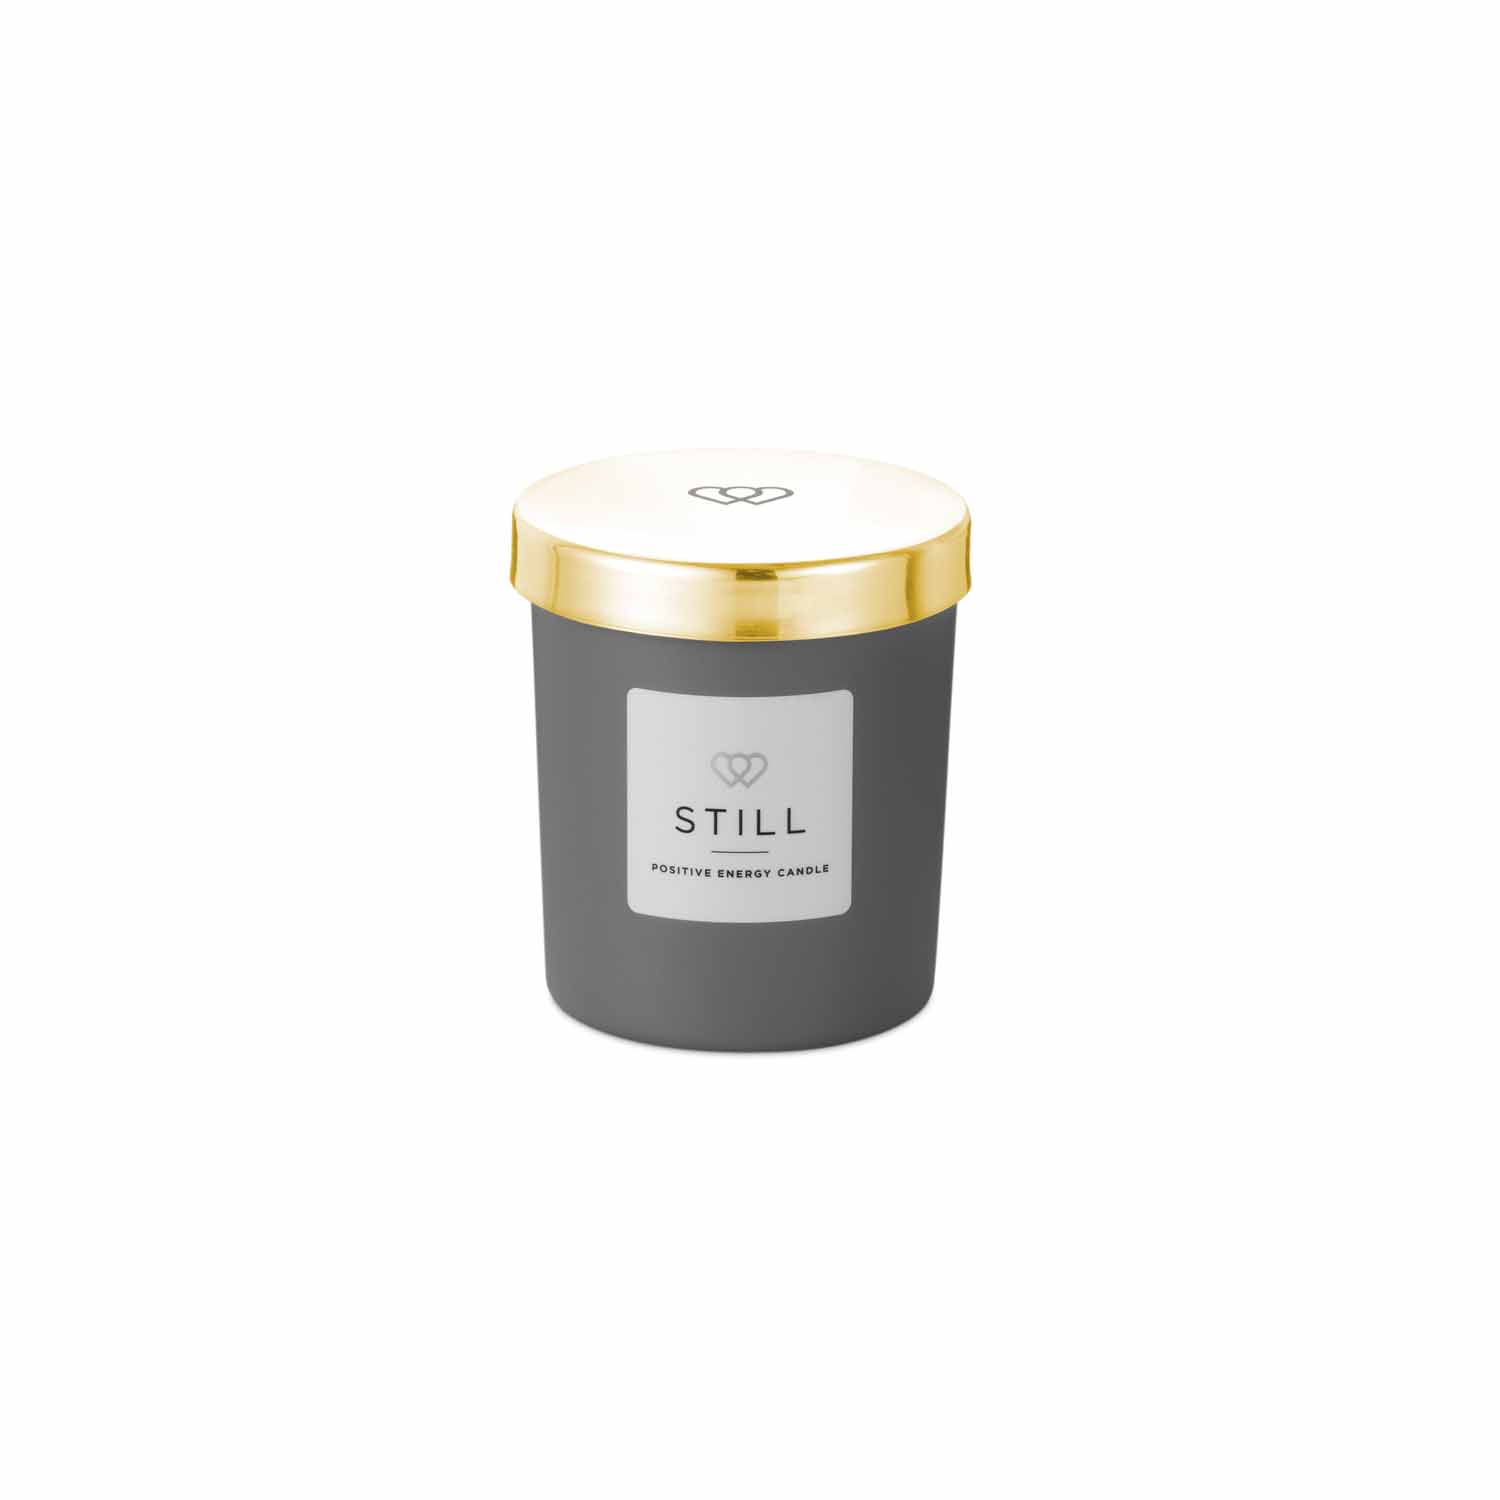 Positive energy mini Candle Still 9cl matt grey woth gold lid - The Universal Soul Company